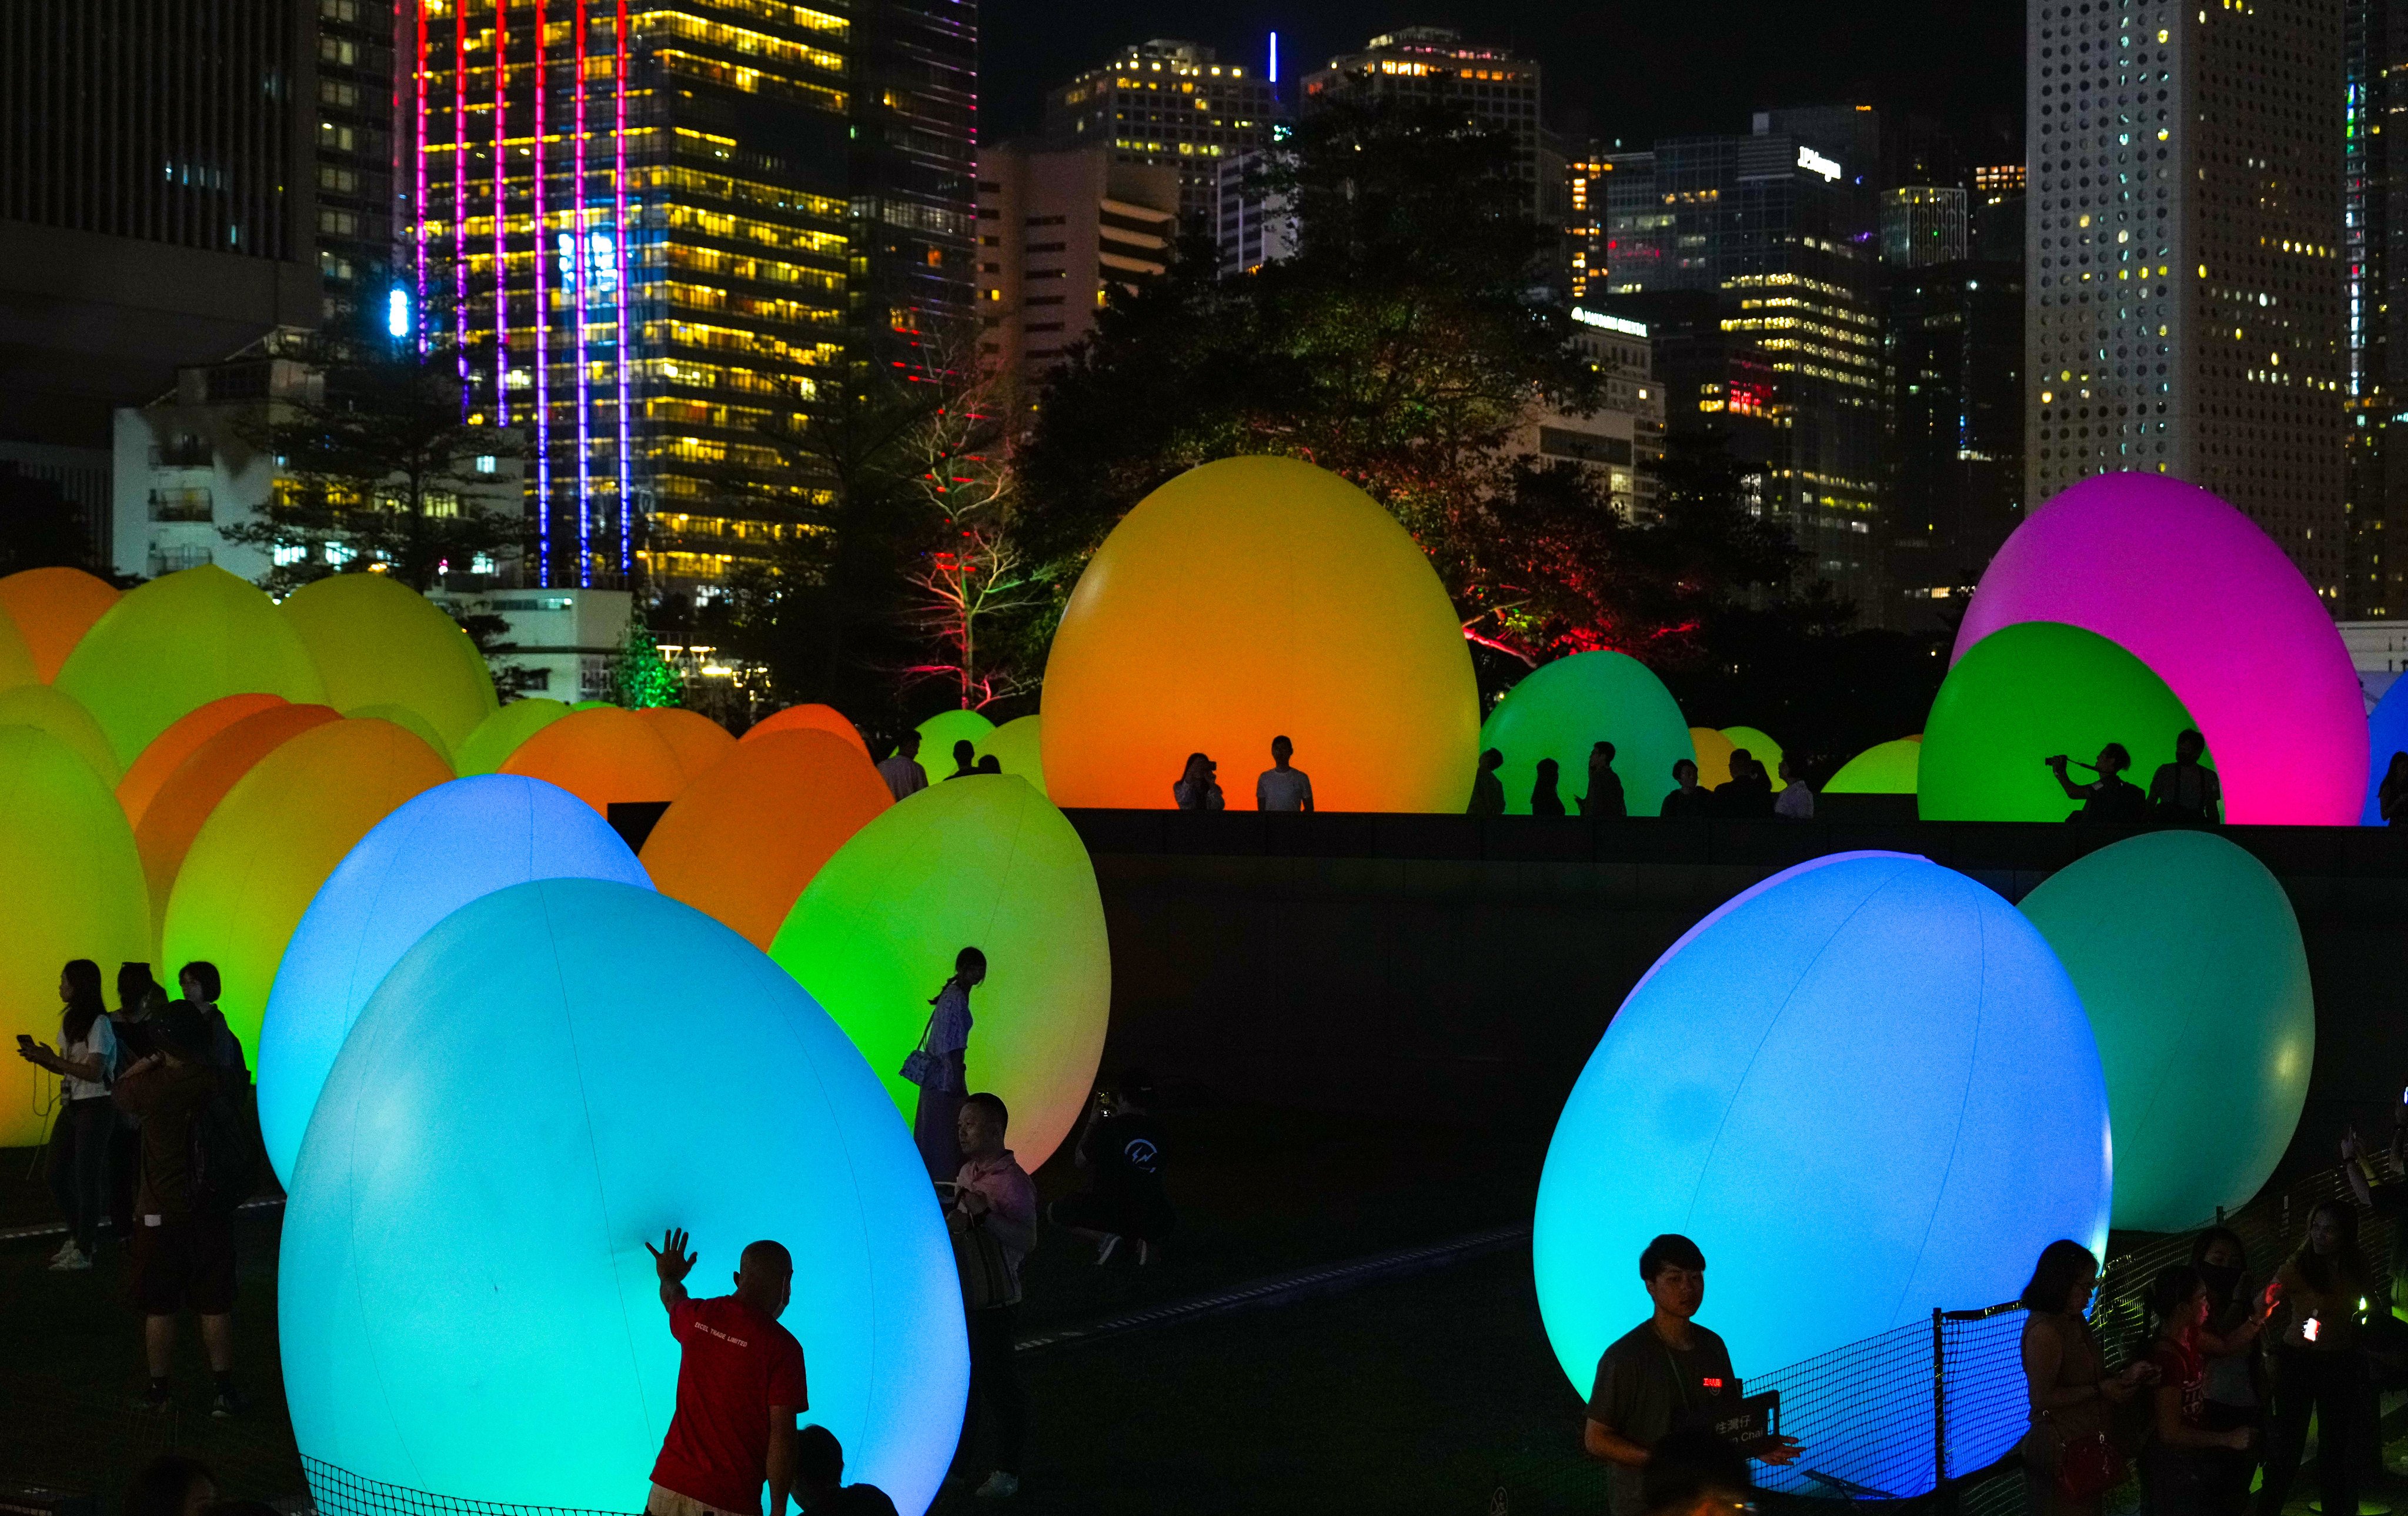 The art installation is located in Tamar Park in Admiralty and open to visitors from 6.30pm to 11pm every night. Photo: Sam Tsang